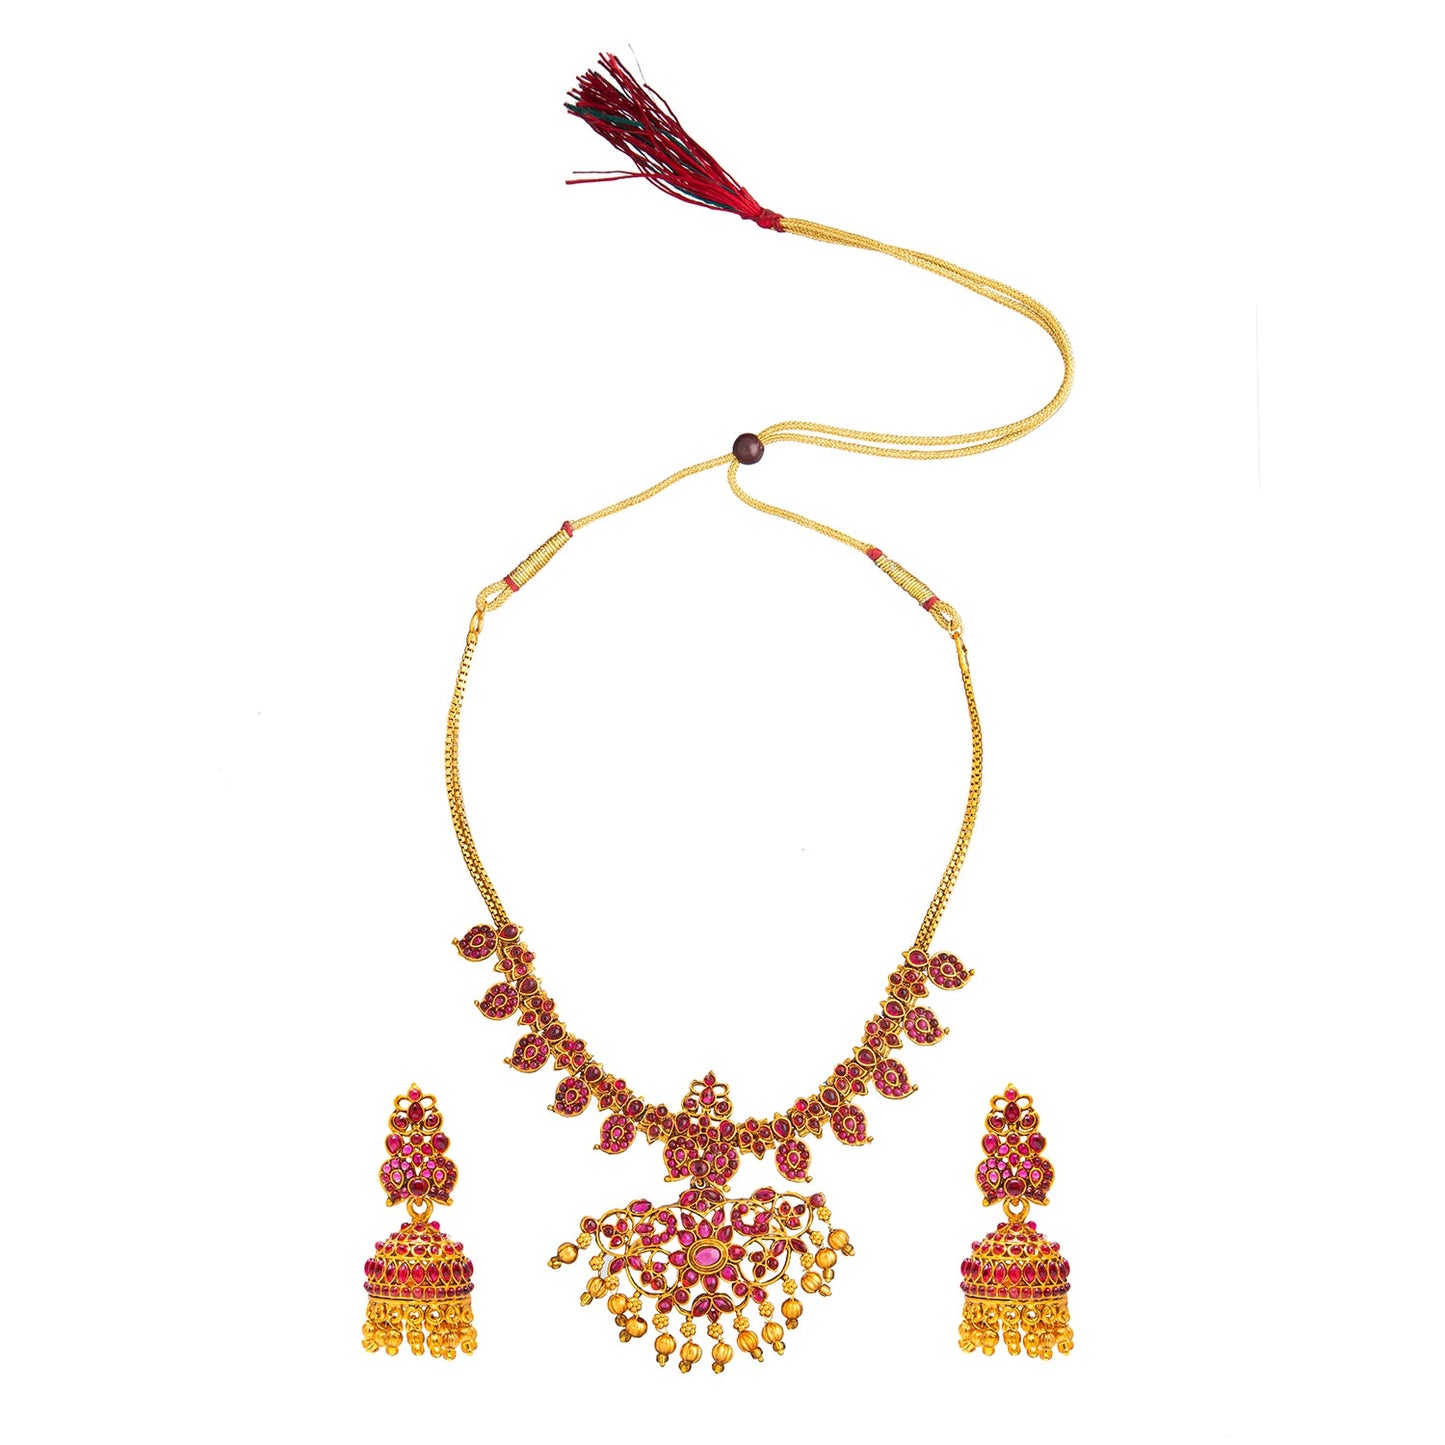 Shining Jewel Traditional Antique Gold Plated Temple Jewellery Traditional Long Bridal Jewellery Necklace Set for Women (SJN_37_P)